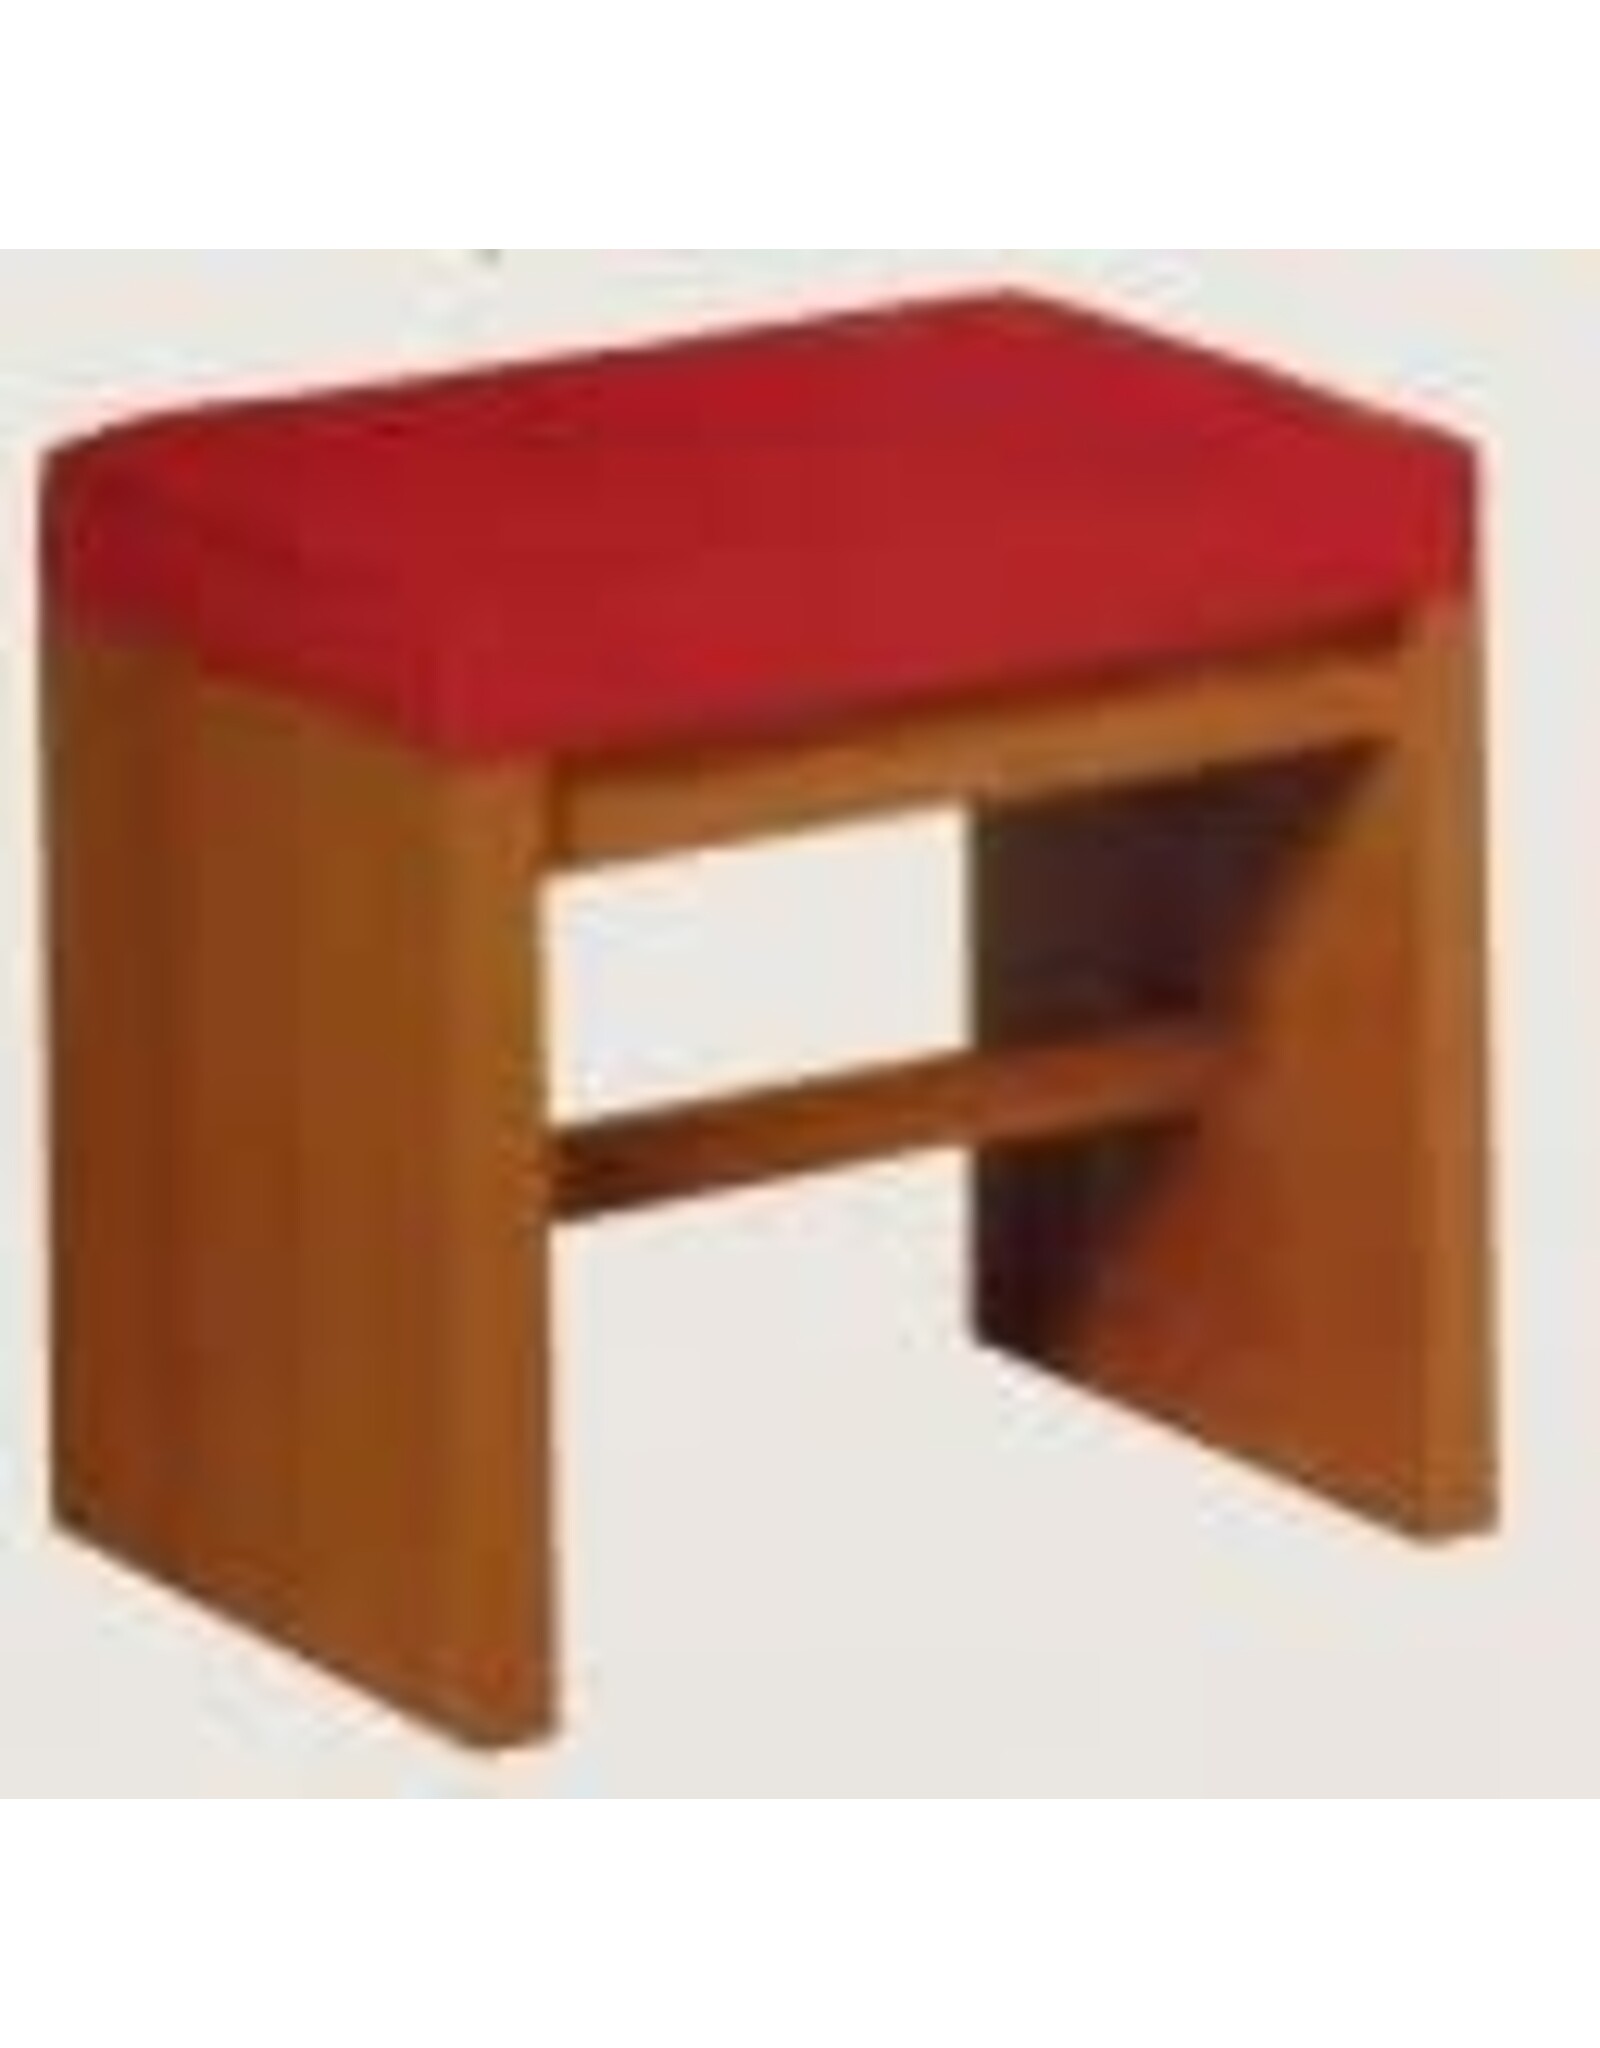 Woerner Industries Stool with Fixed Cushion